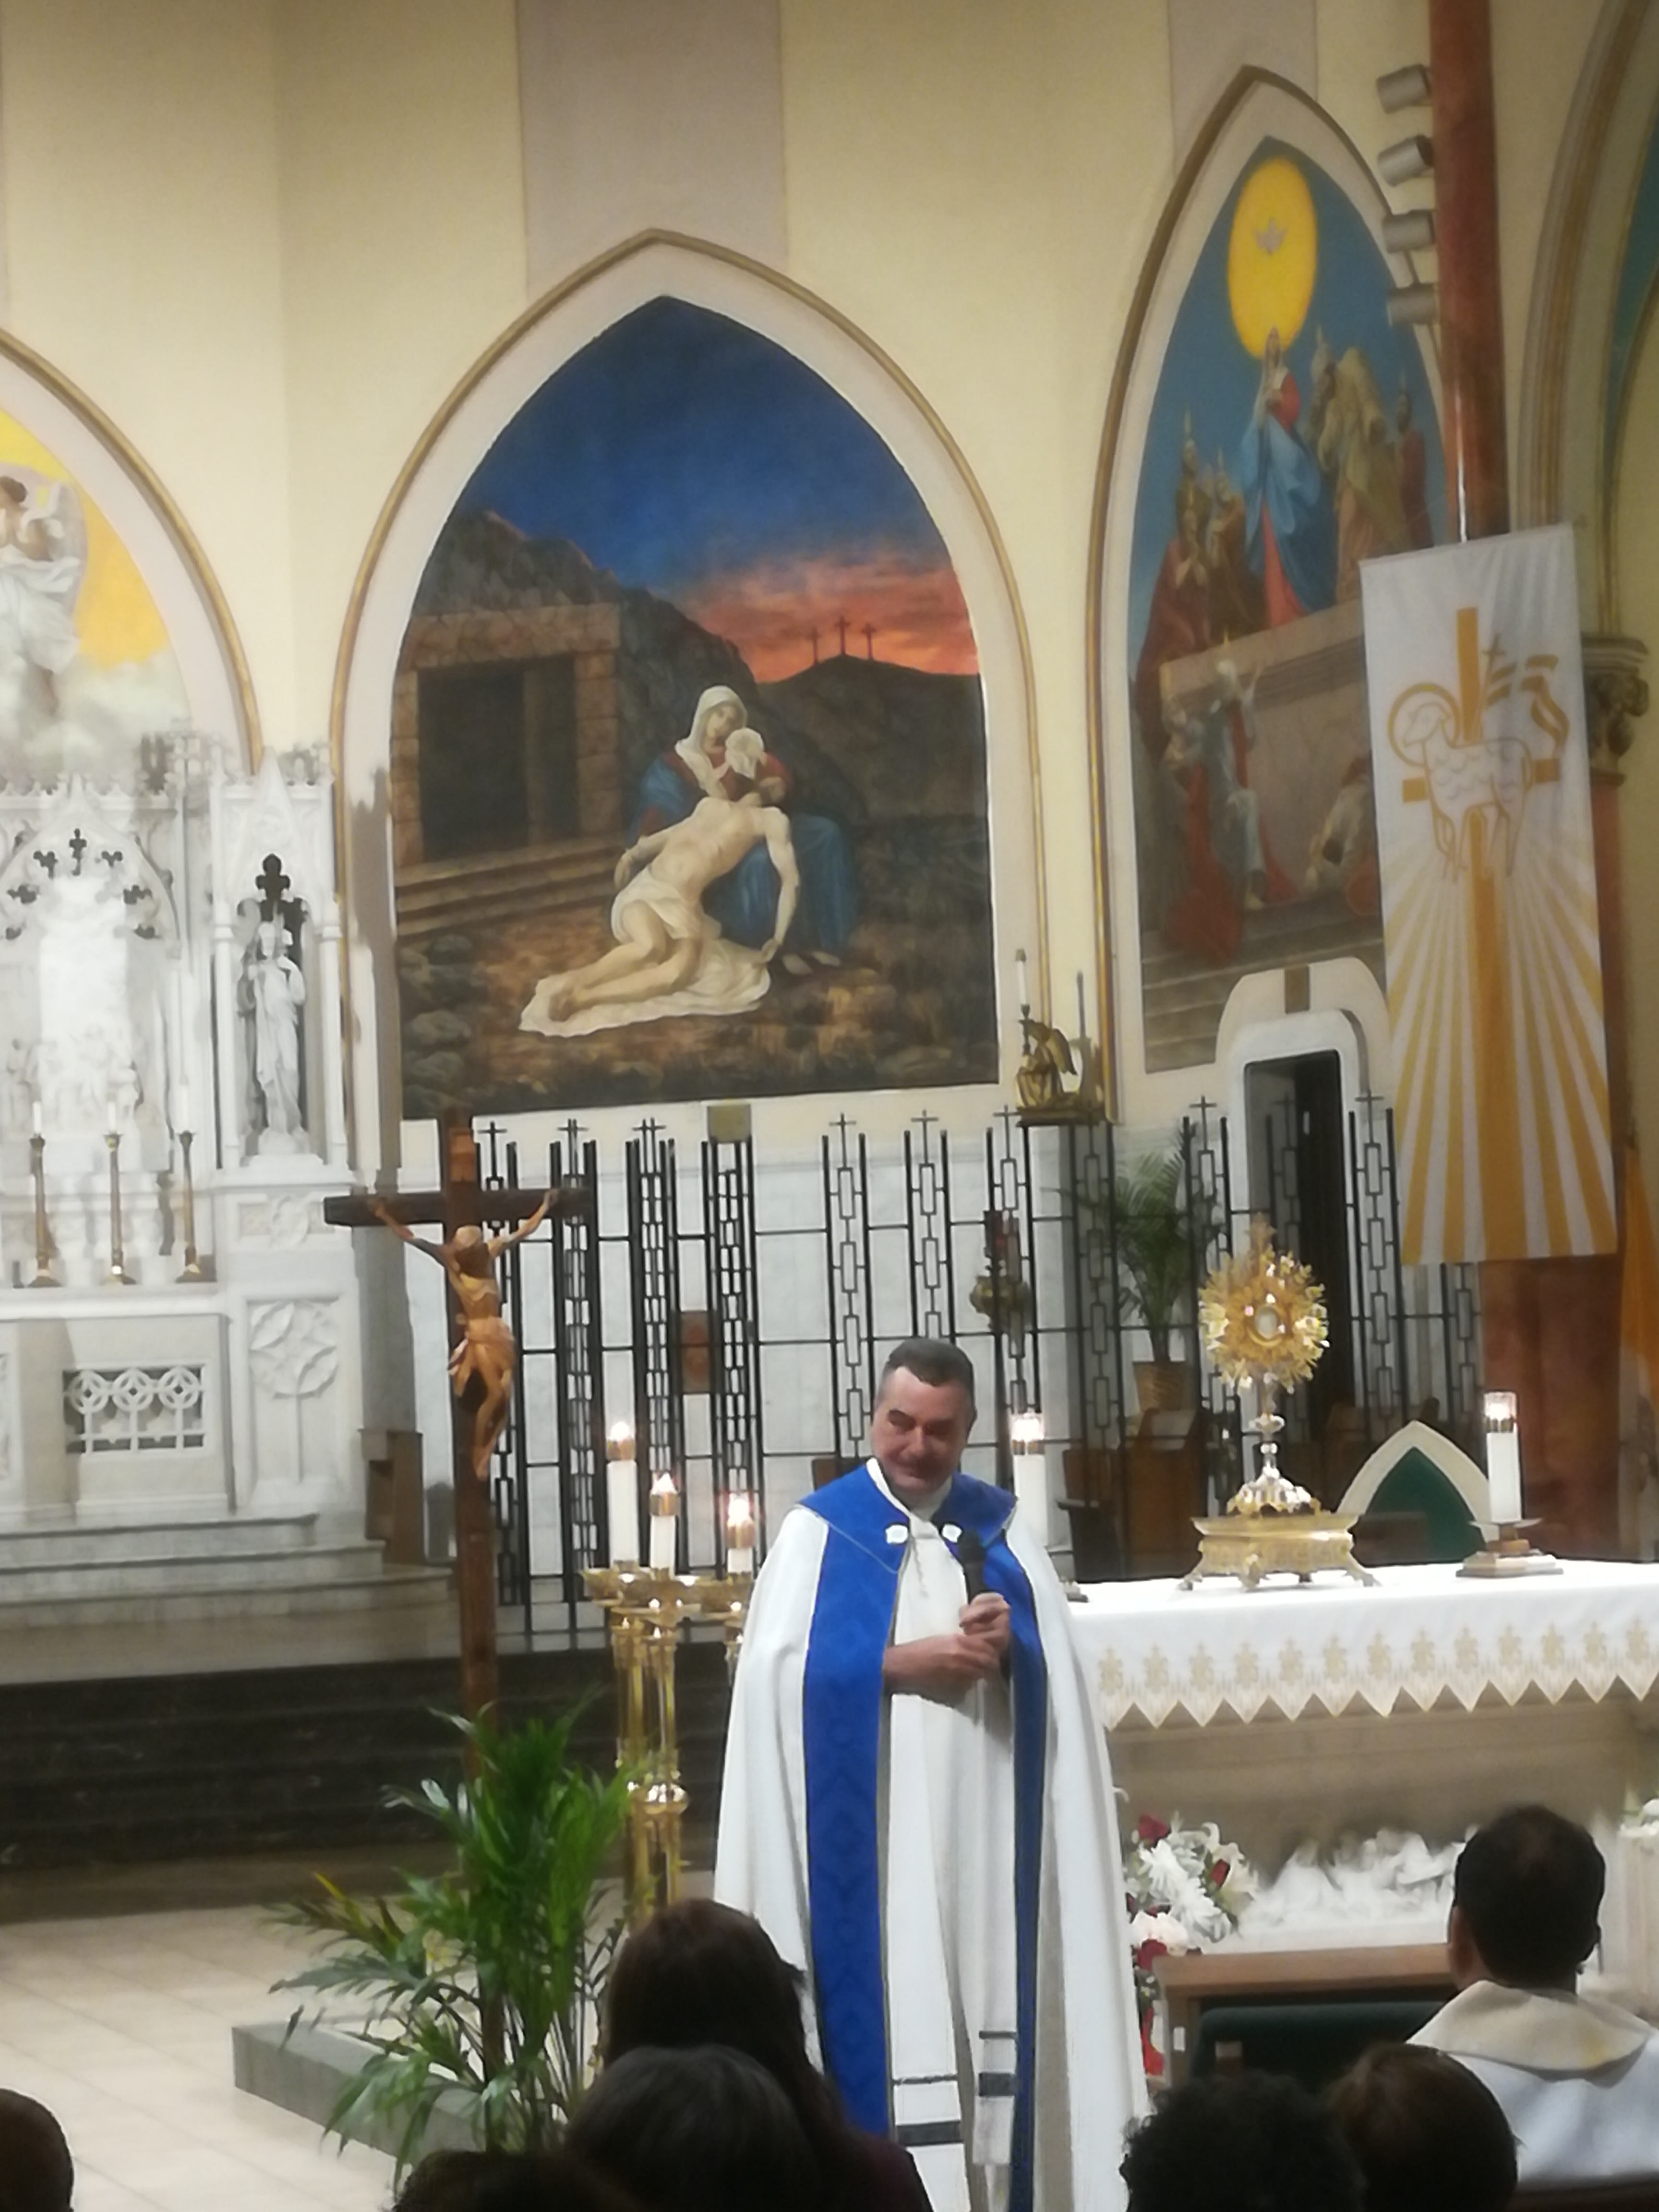 A priest standing in front of a church altar.